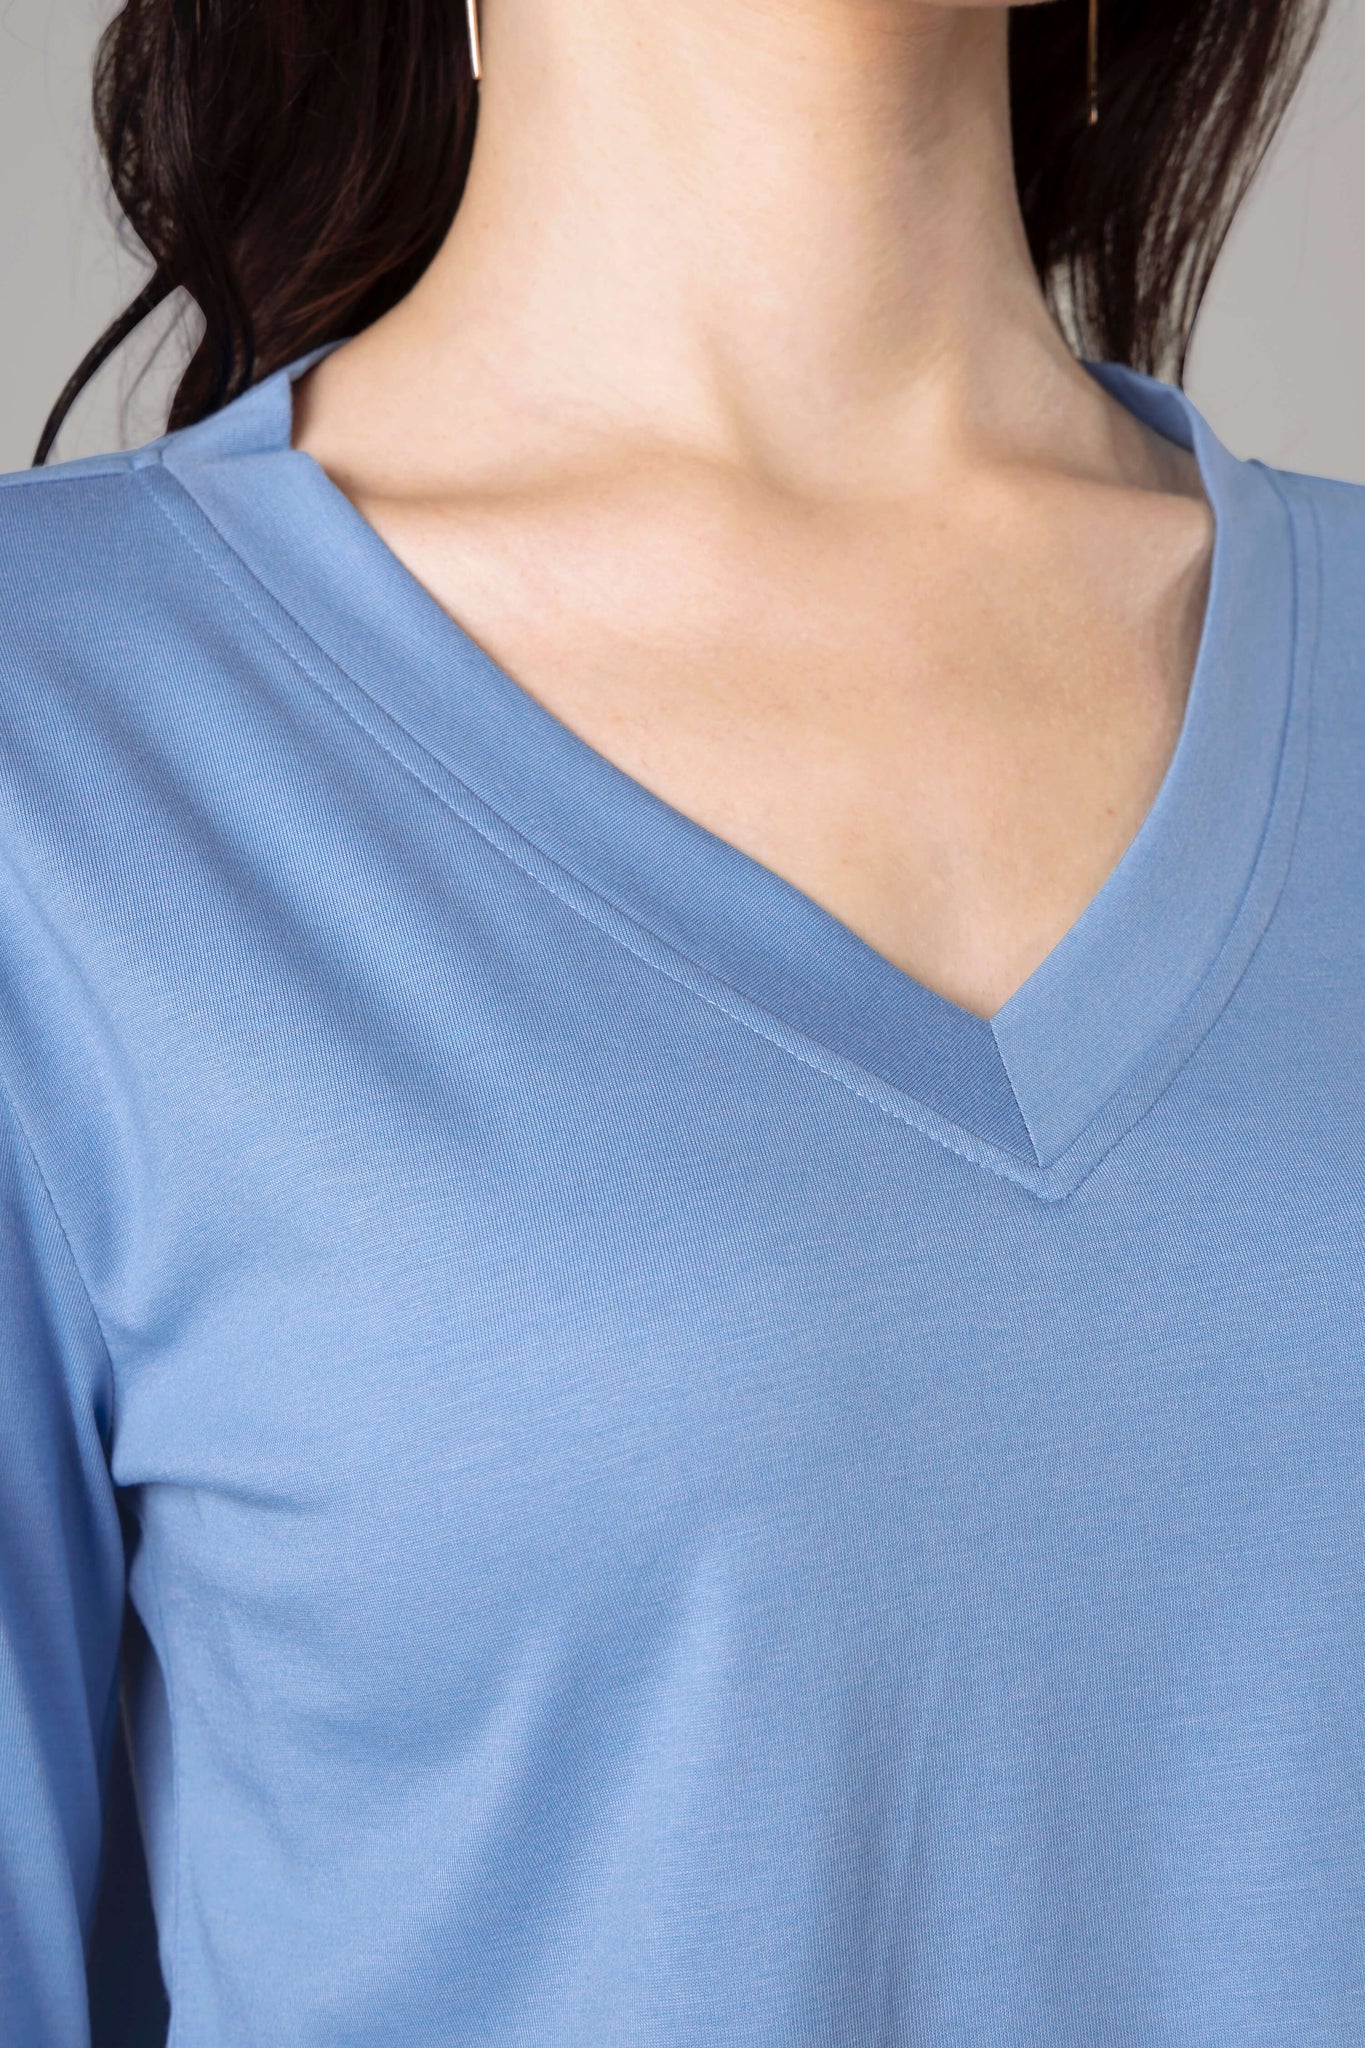 Women's Pure Comfort Cotton T-Shirt For Everyday